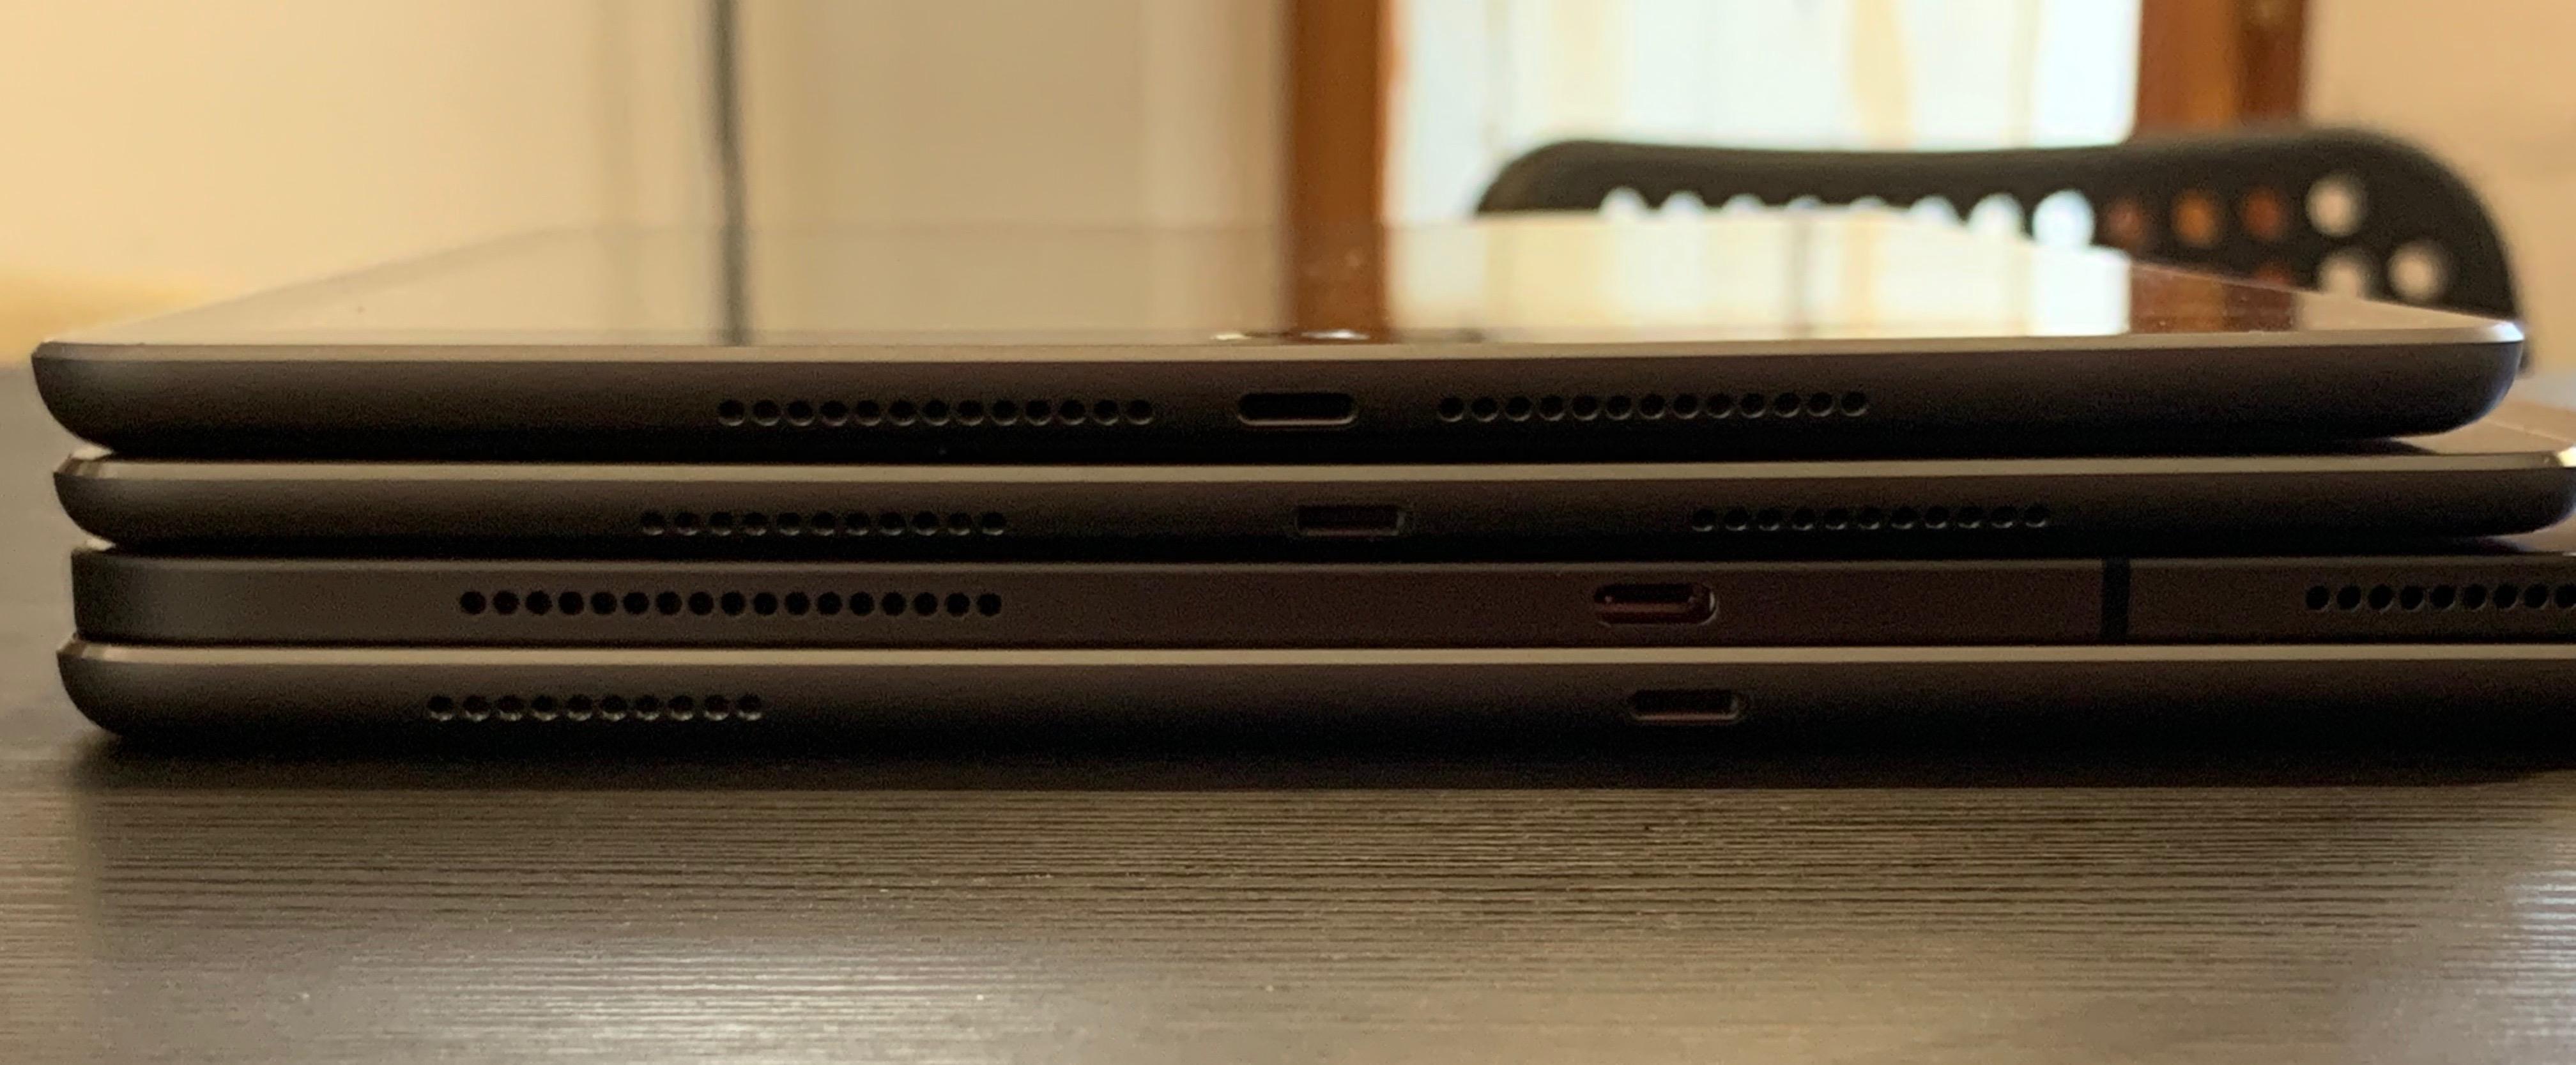 The flat edges of the new iPad Pro are noticeably different from previous iPads.